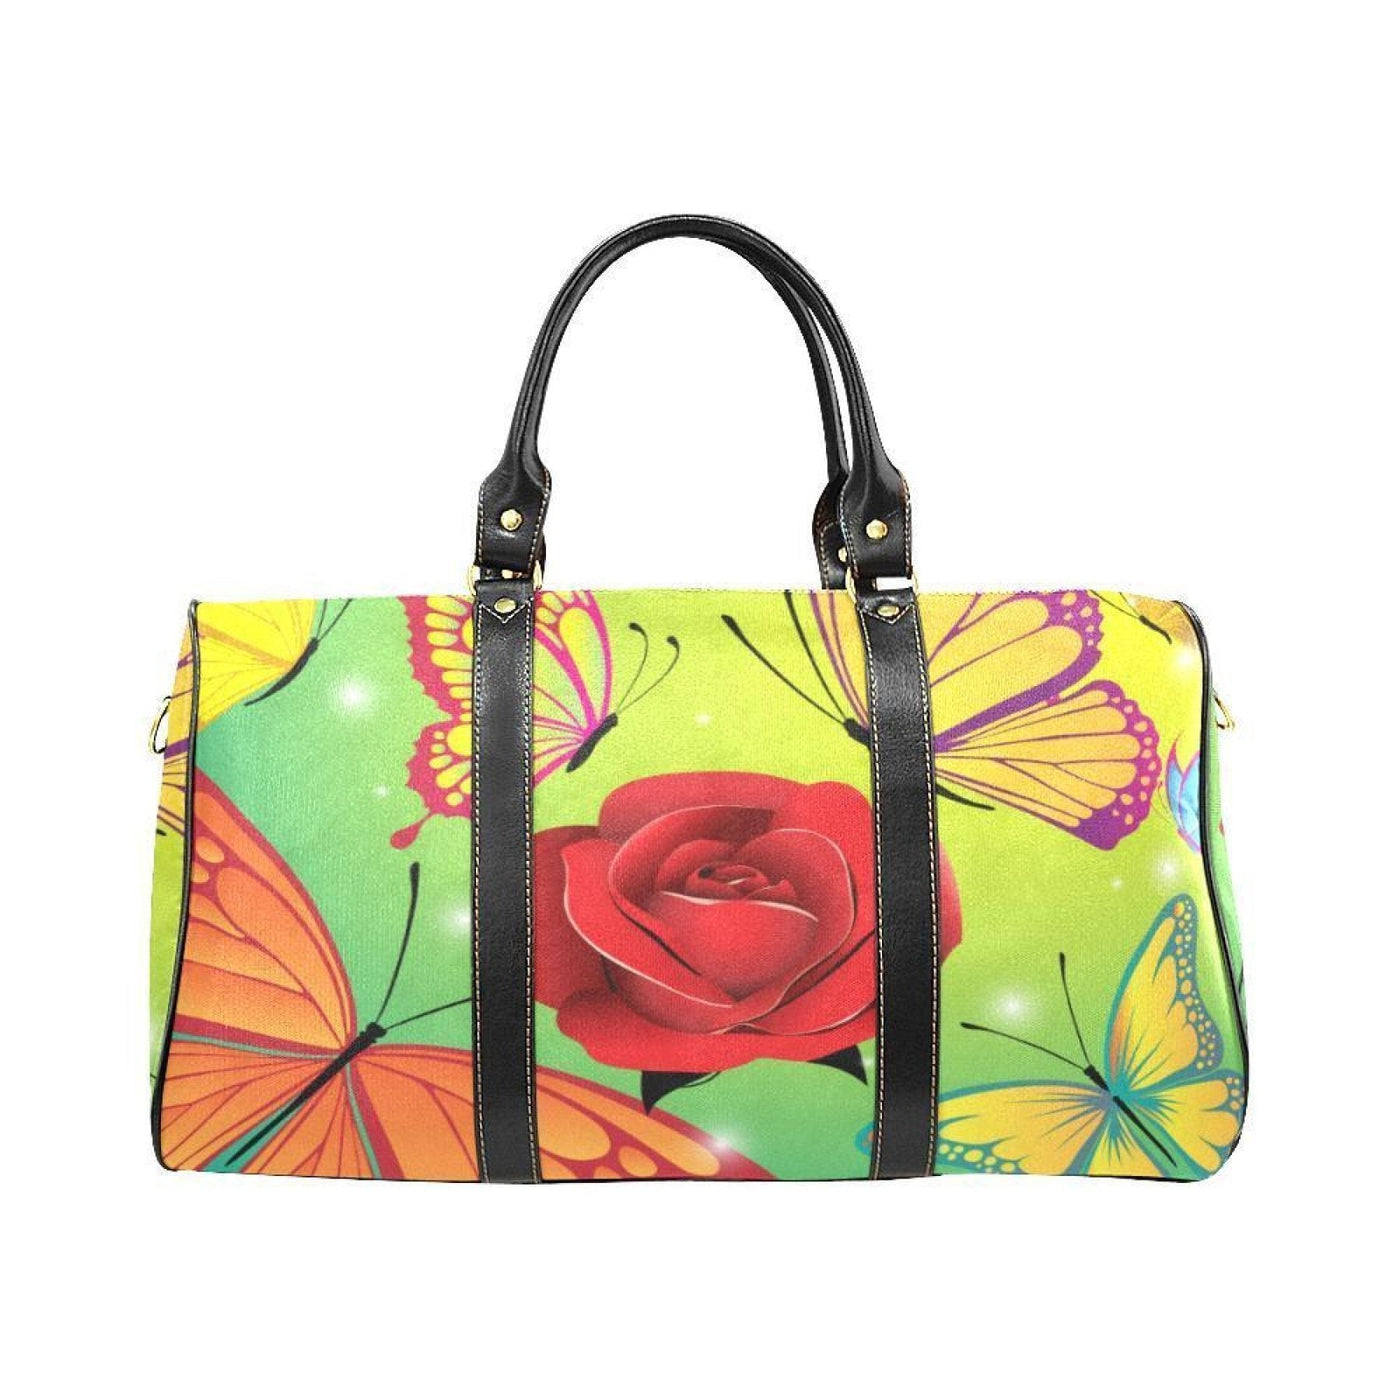 Travel Bag Leather Carry On Large Luggage Bag Vibrant Rose - Bags | Travel Bags